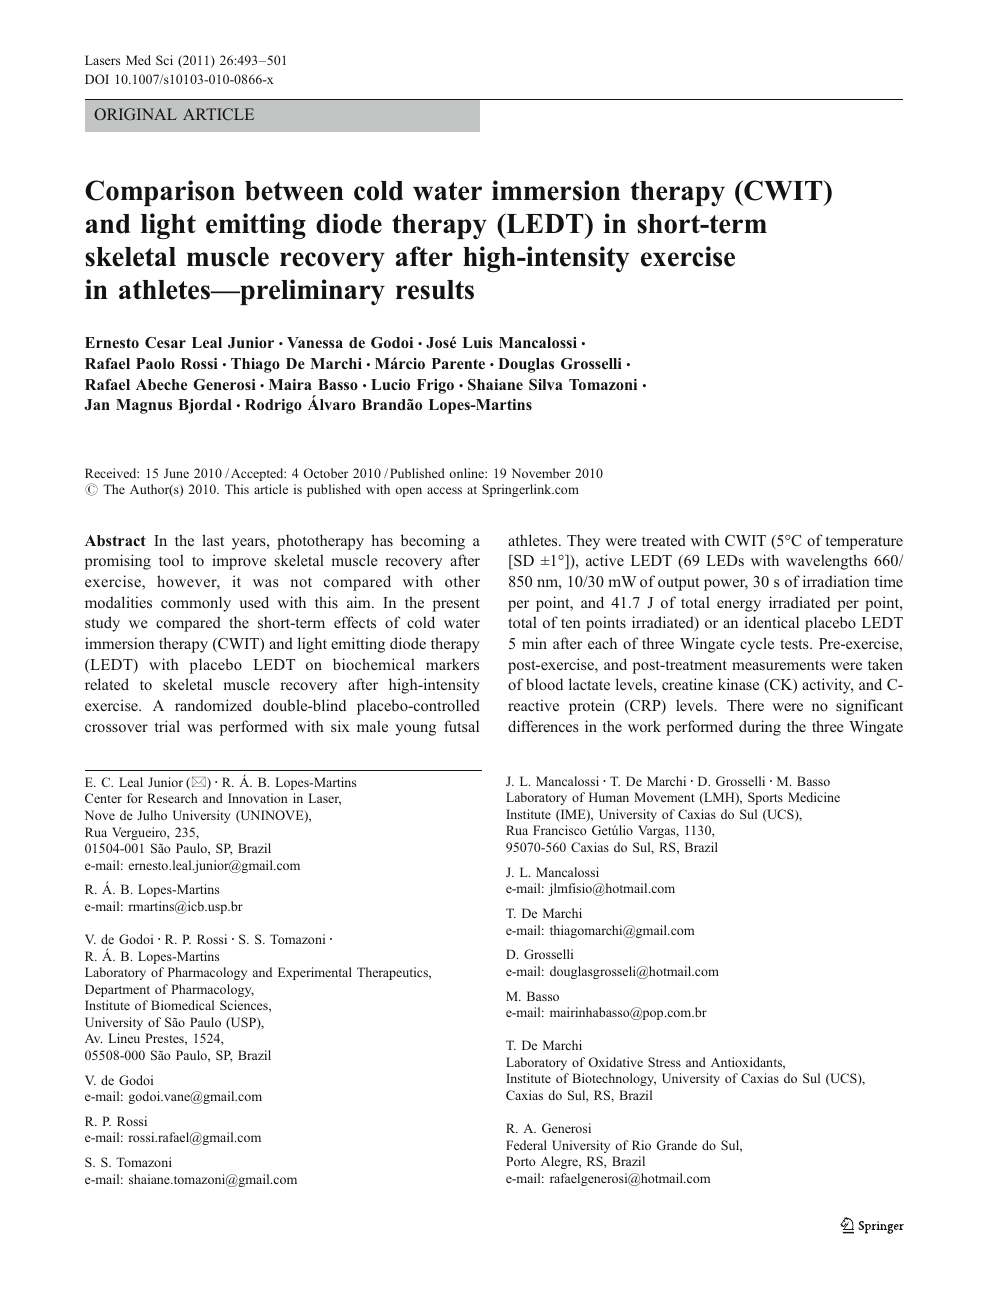 Comparison Between Cold Water Immersion Therapy Cwit And Light Emitting Diode Therapy Ledt In Short Term Skeletal Muscle Recovery After High Intensity Exercise In Athletes Preliminary Results Topic Of Research Paper In Medical Engineering